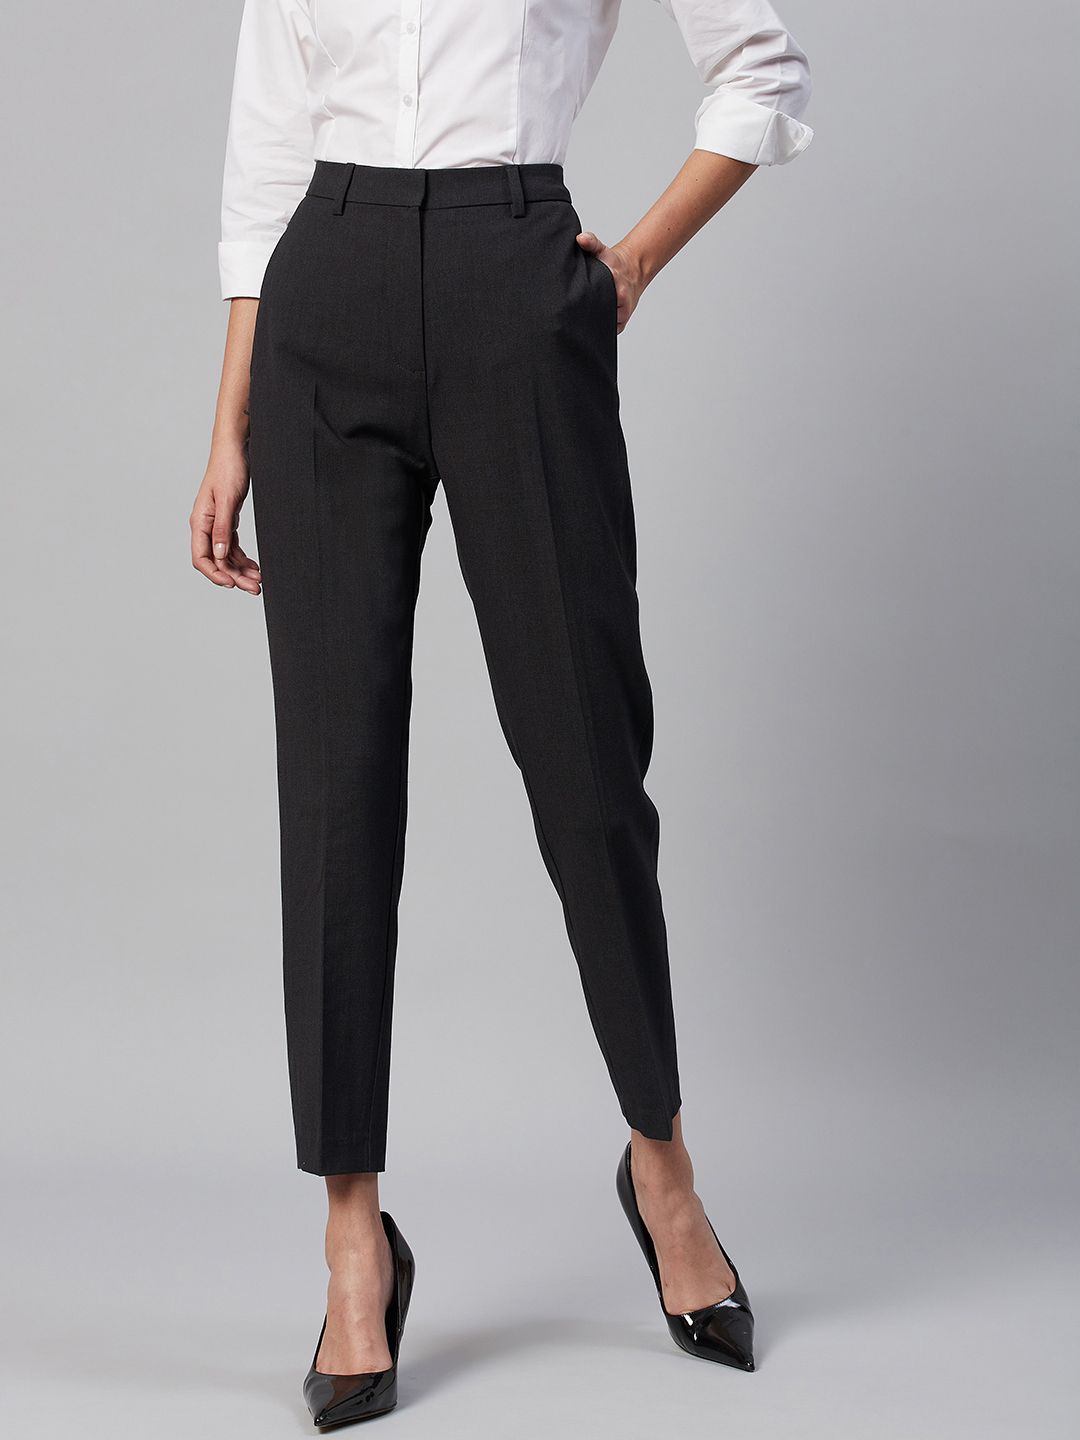 Marks & Spencer Women Charcoal Grey Slim Fit Trousers Price in India